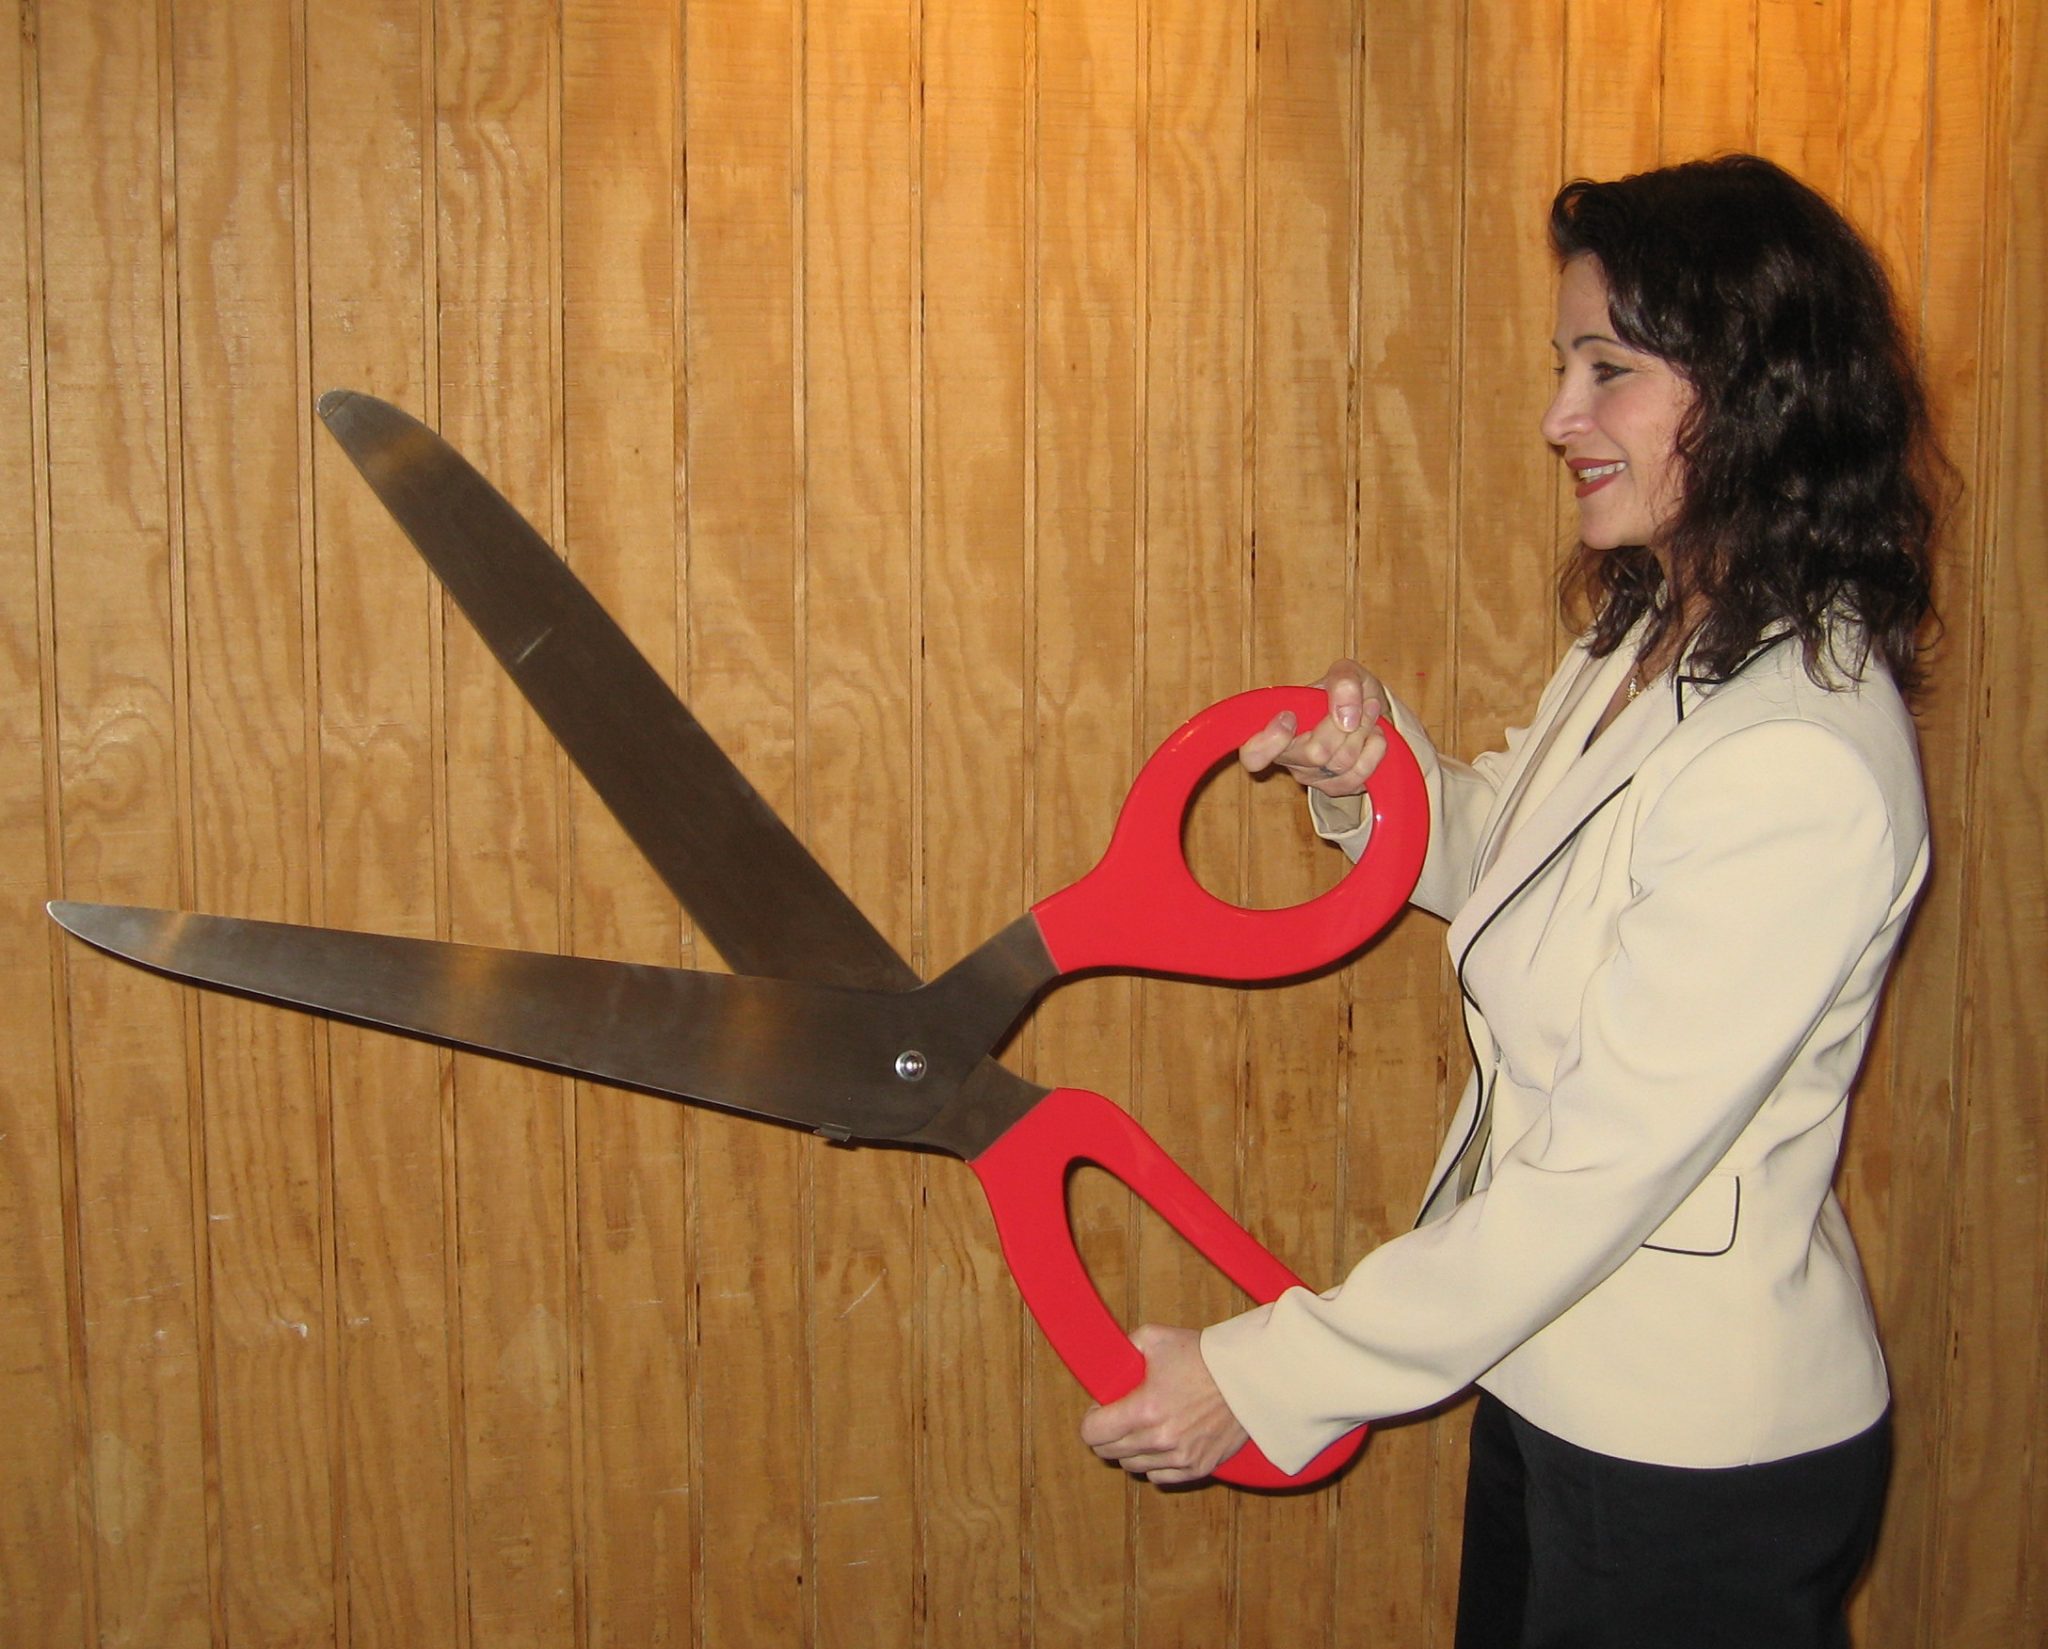 Grand Opening Large Ribbon Cutting Scissors Rental Package